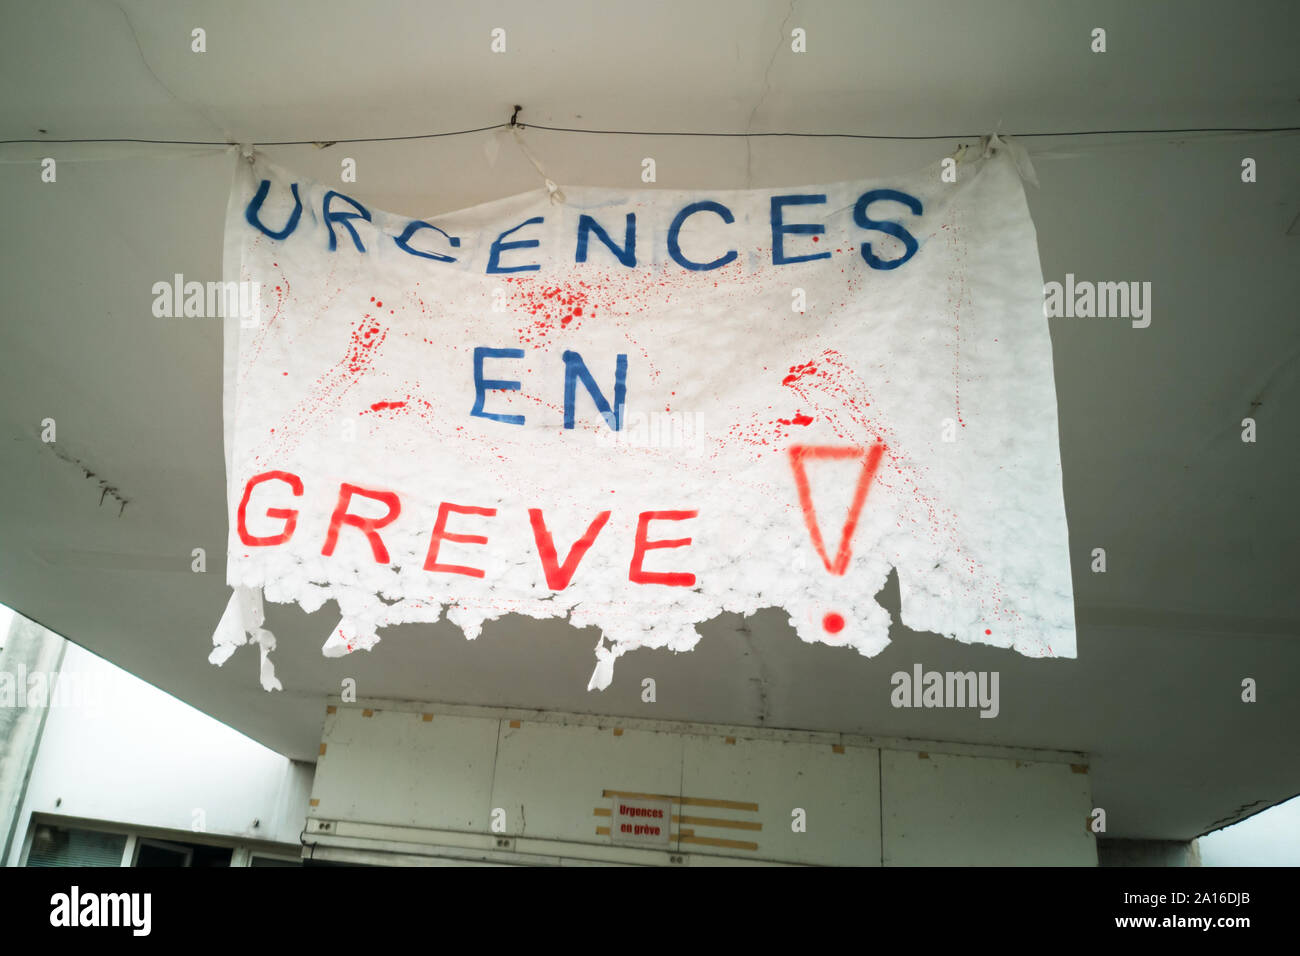 Urgences en greve (meaning medical emergency on strike in French) written on a used banner in France Stock Photo